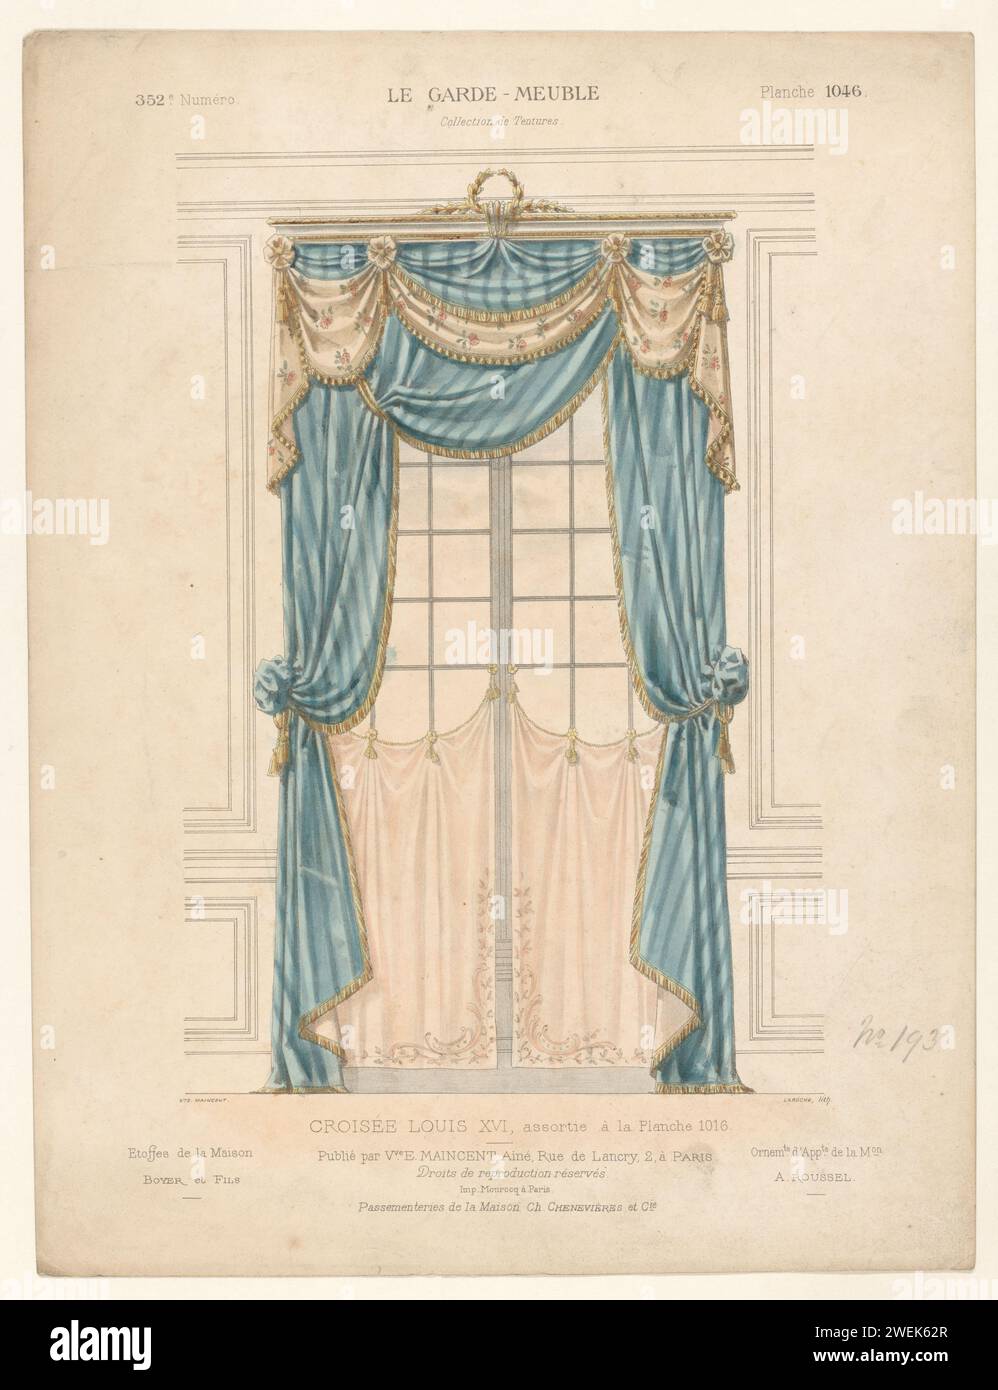 Window with curtains, Léon Laroche, after widow Eugène MAINCEN, 1895 - c. 1910 print Cross window with draped curtains in the Louis XVI style, appropriate for Serienr. 1016. Print from 352nd Livraison.  paper  hangings and drapery. window Stock Photo